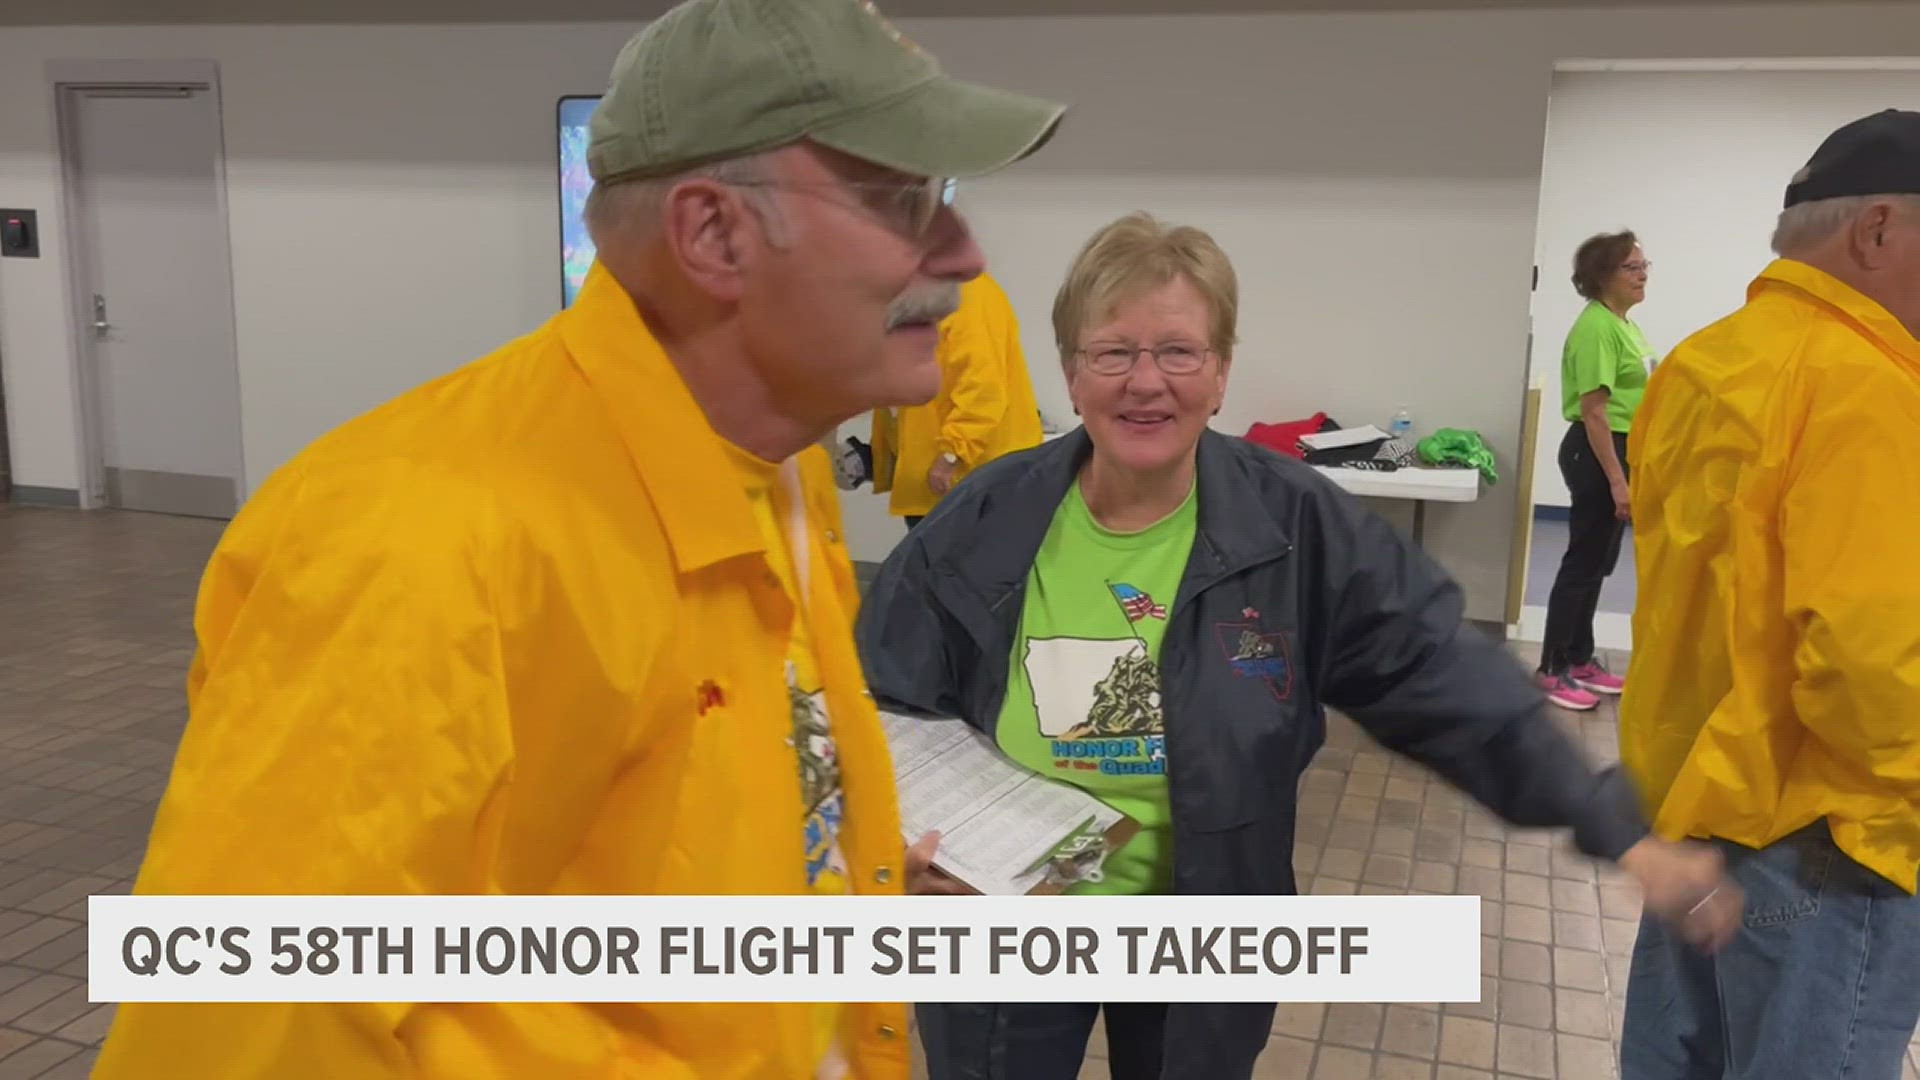 This morning the 58th Hy-Vee Honor Flight will depart for the nation's capital. They'll spend the day seeing the monuments.